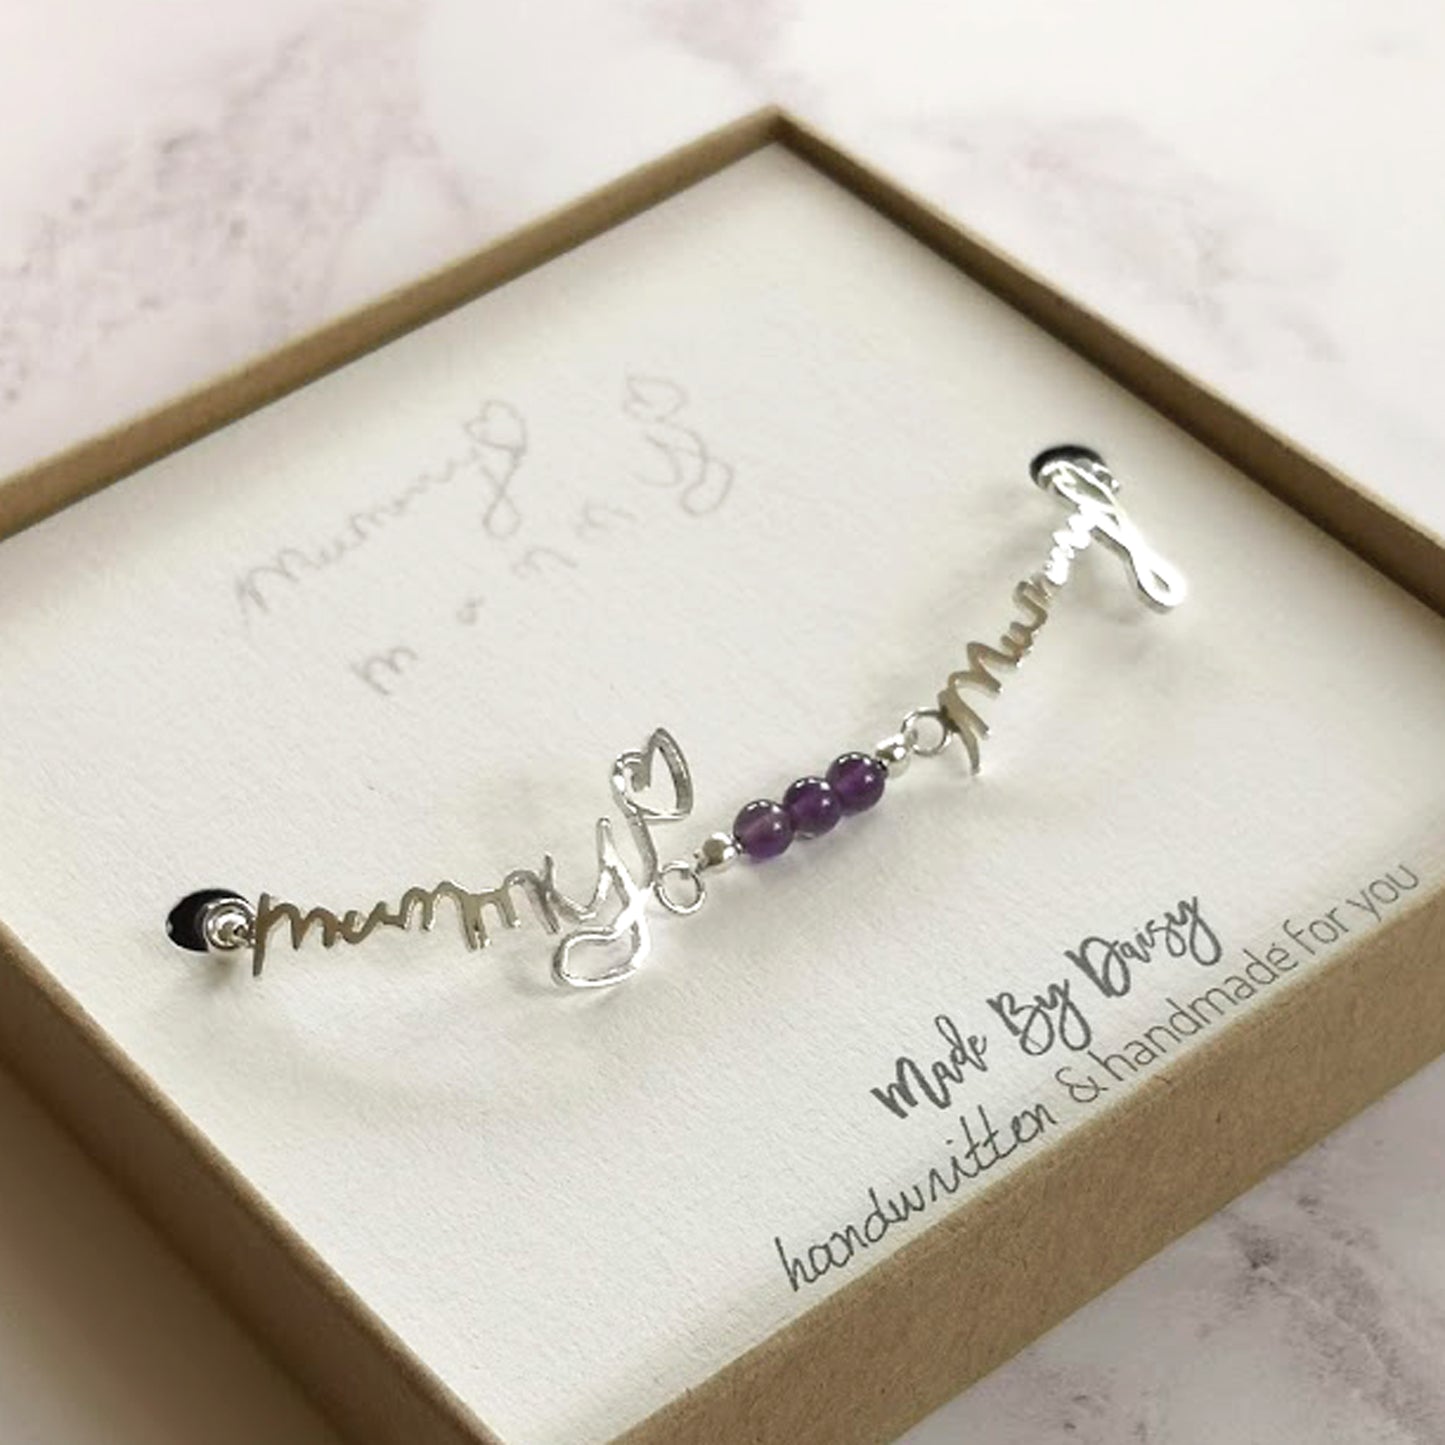 Gemstone Handwriting Bracelet with Two Pieces of Handwriting